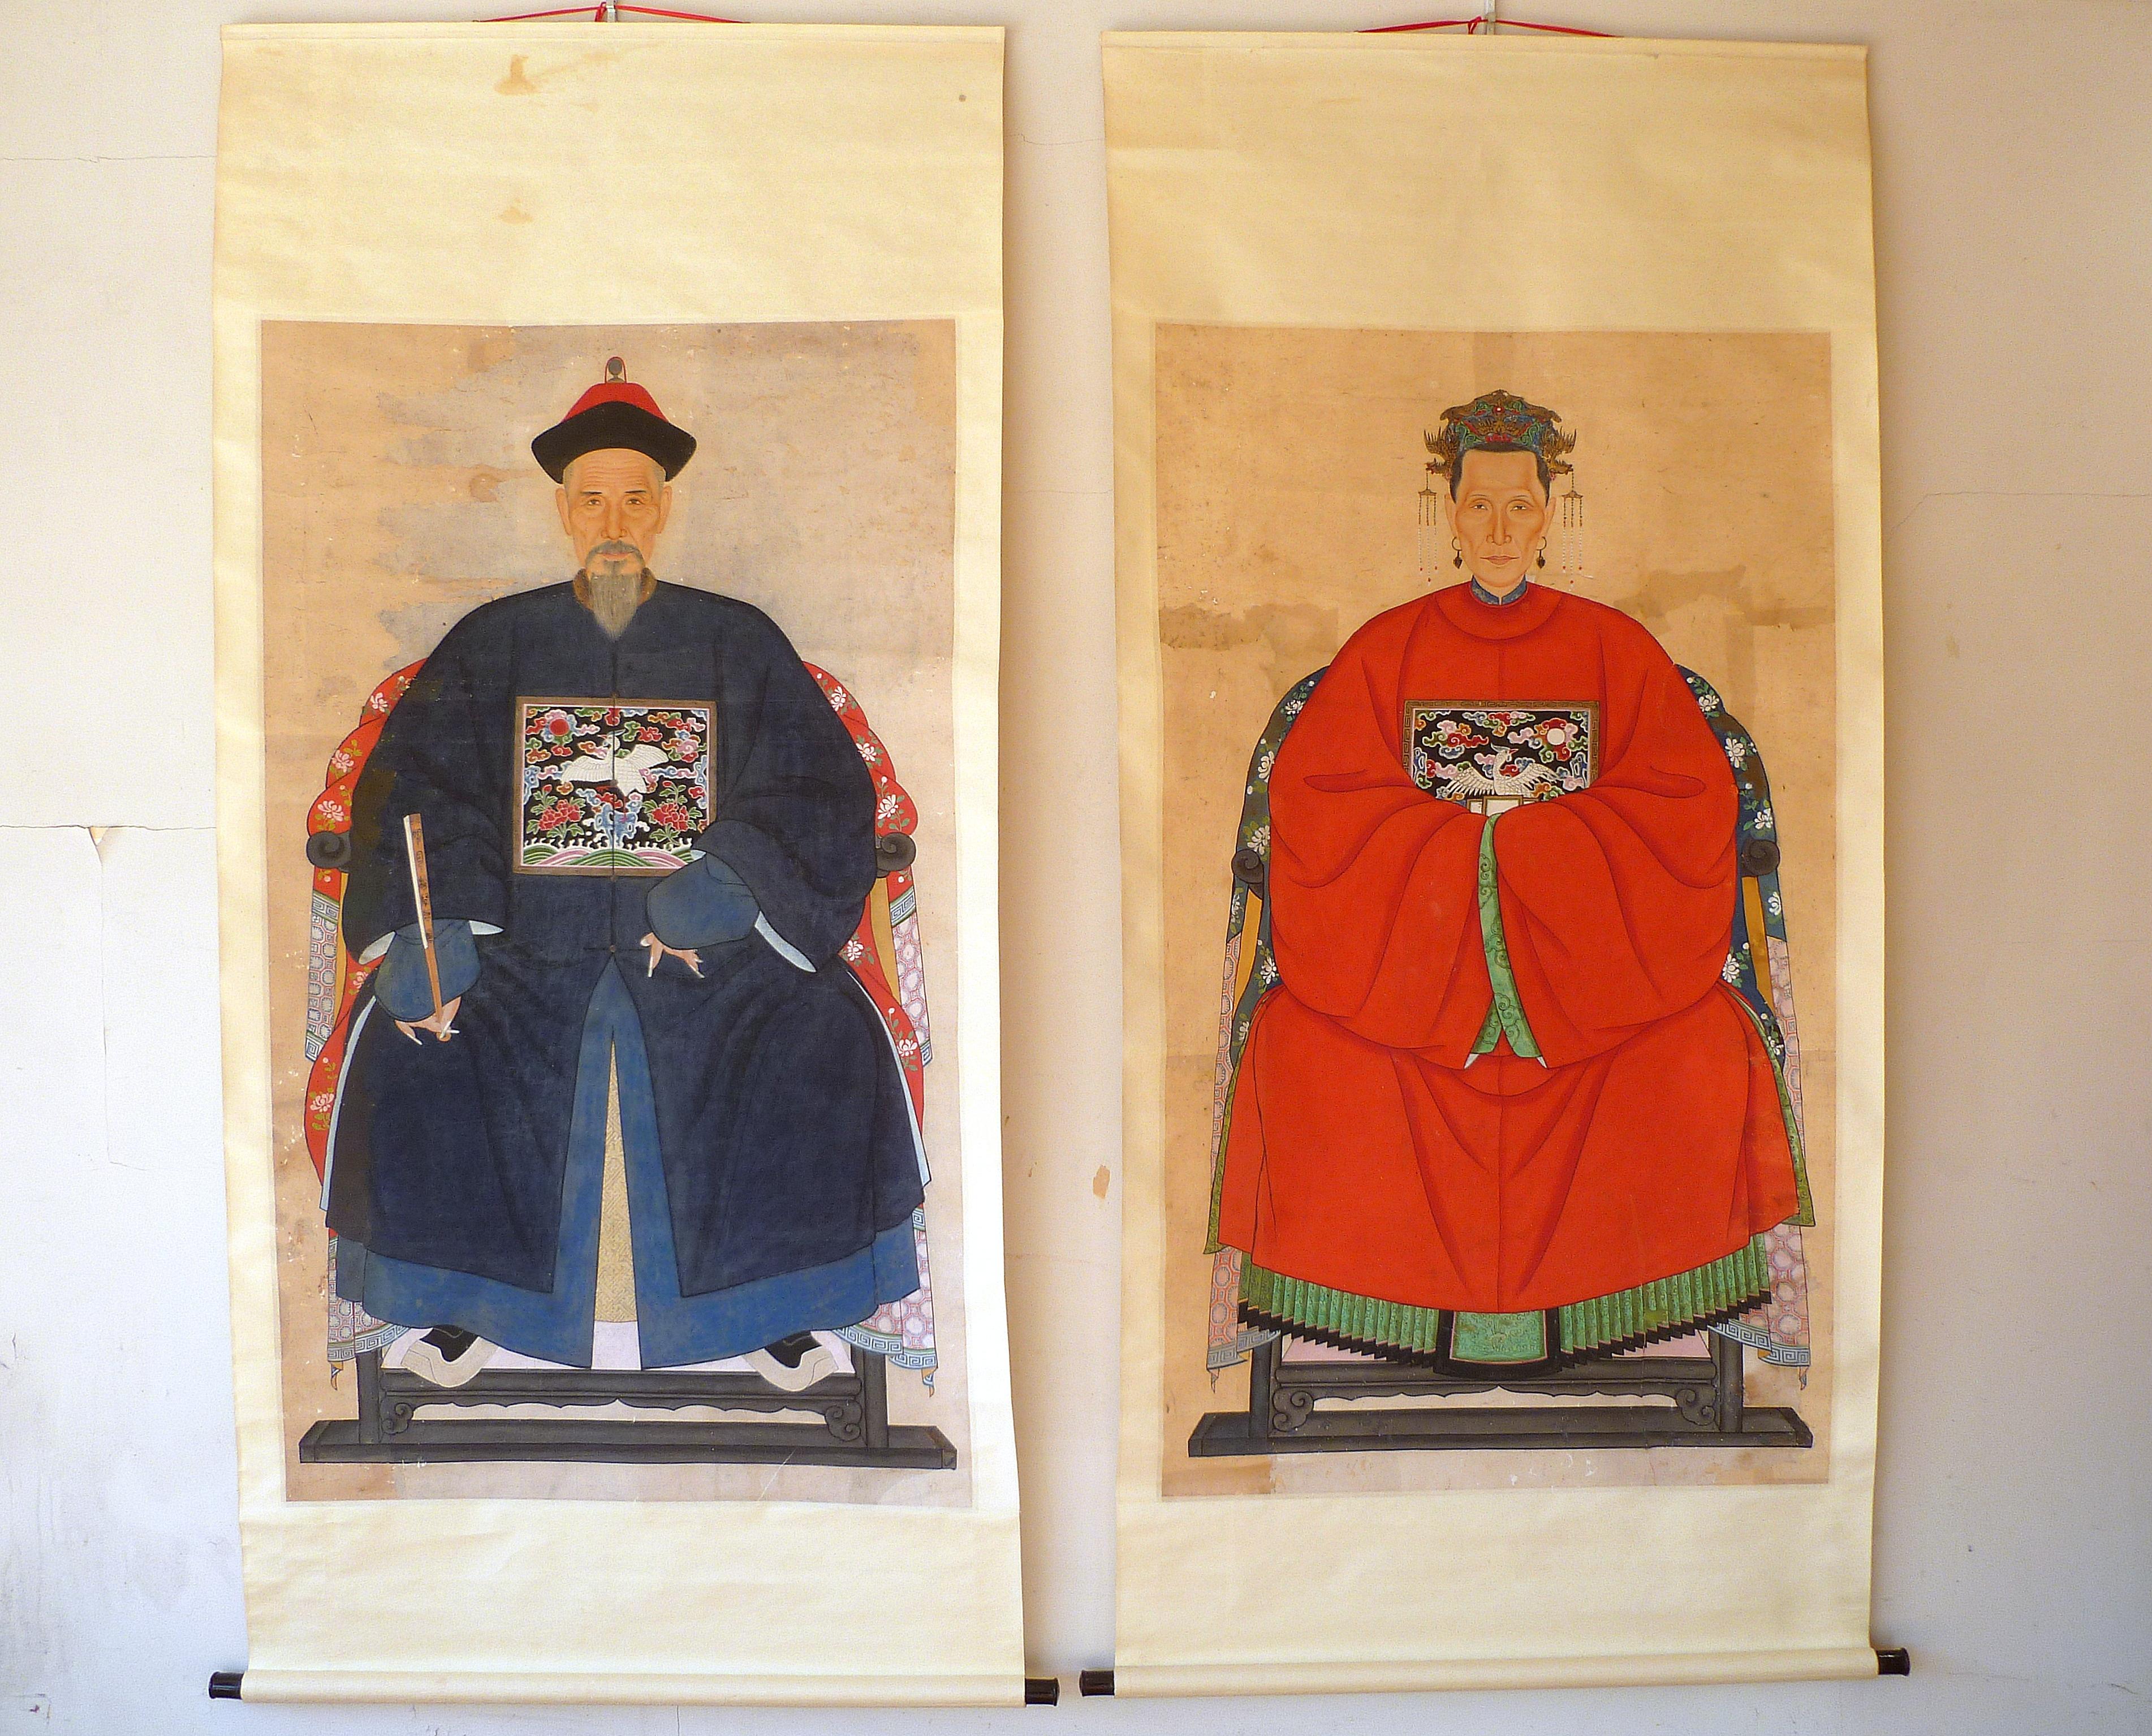 Pair of Chinese Qing dynasty imperial office and wife ancestor portrait paintings.
Very nice detail and fine paintings.
Overall size: Each painting included outer brocade  is 36.5